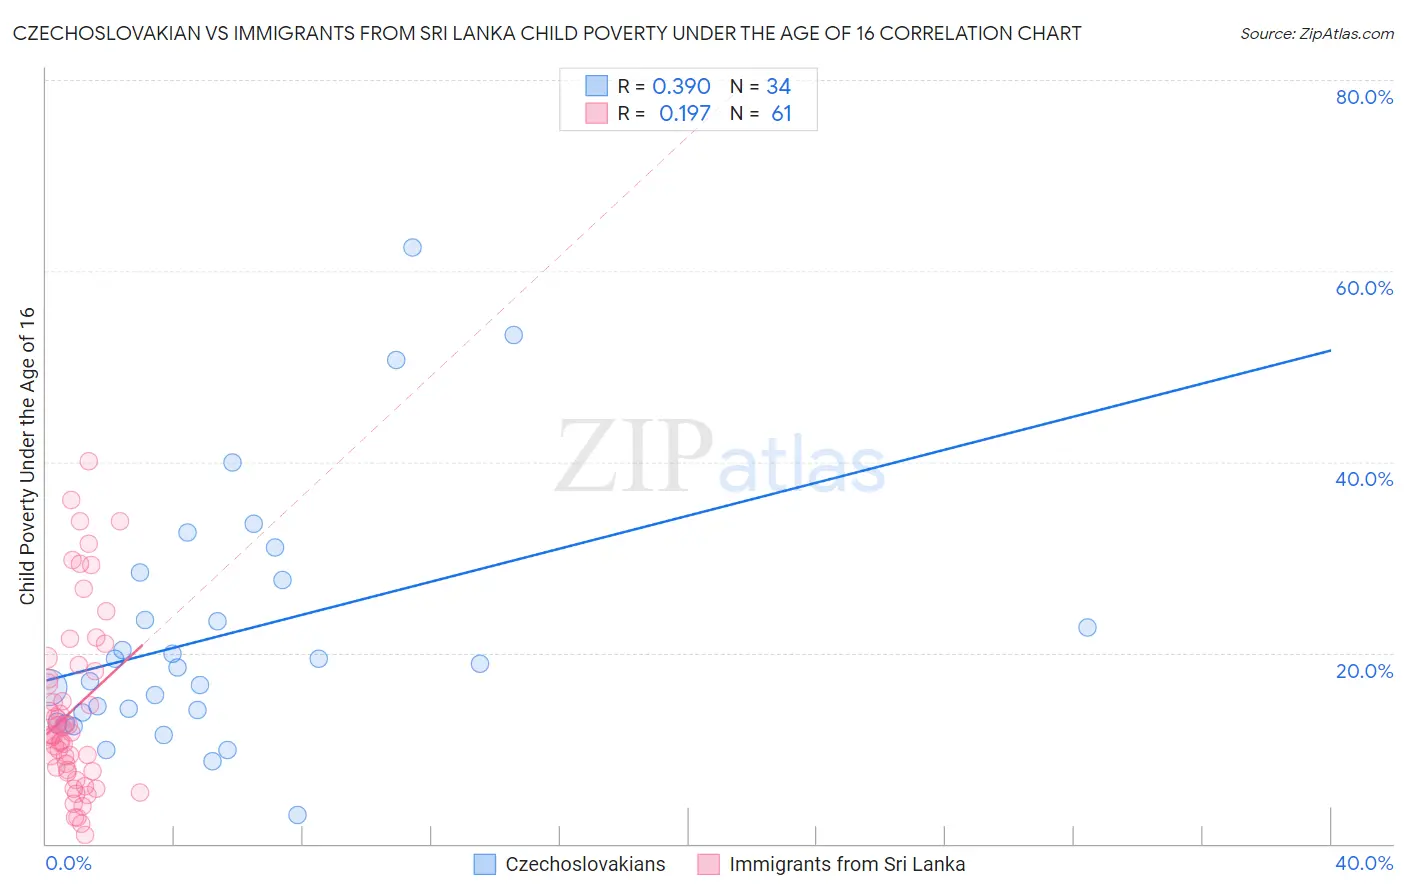 Czechoslovakian vs Immigrants from Sri Lanka Child Poverty Under the Age of 16